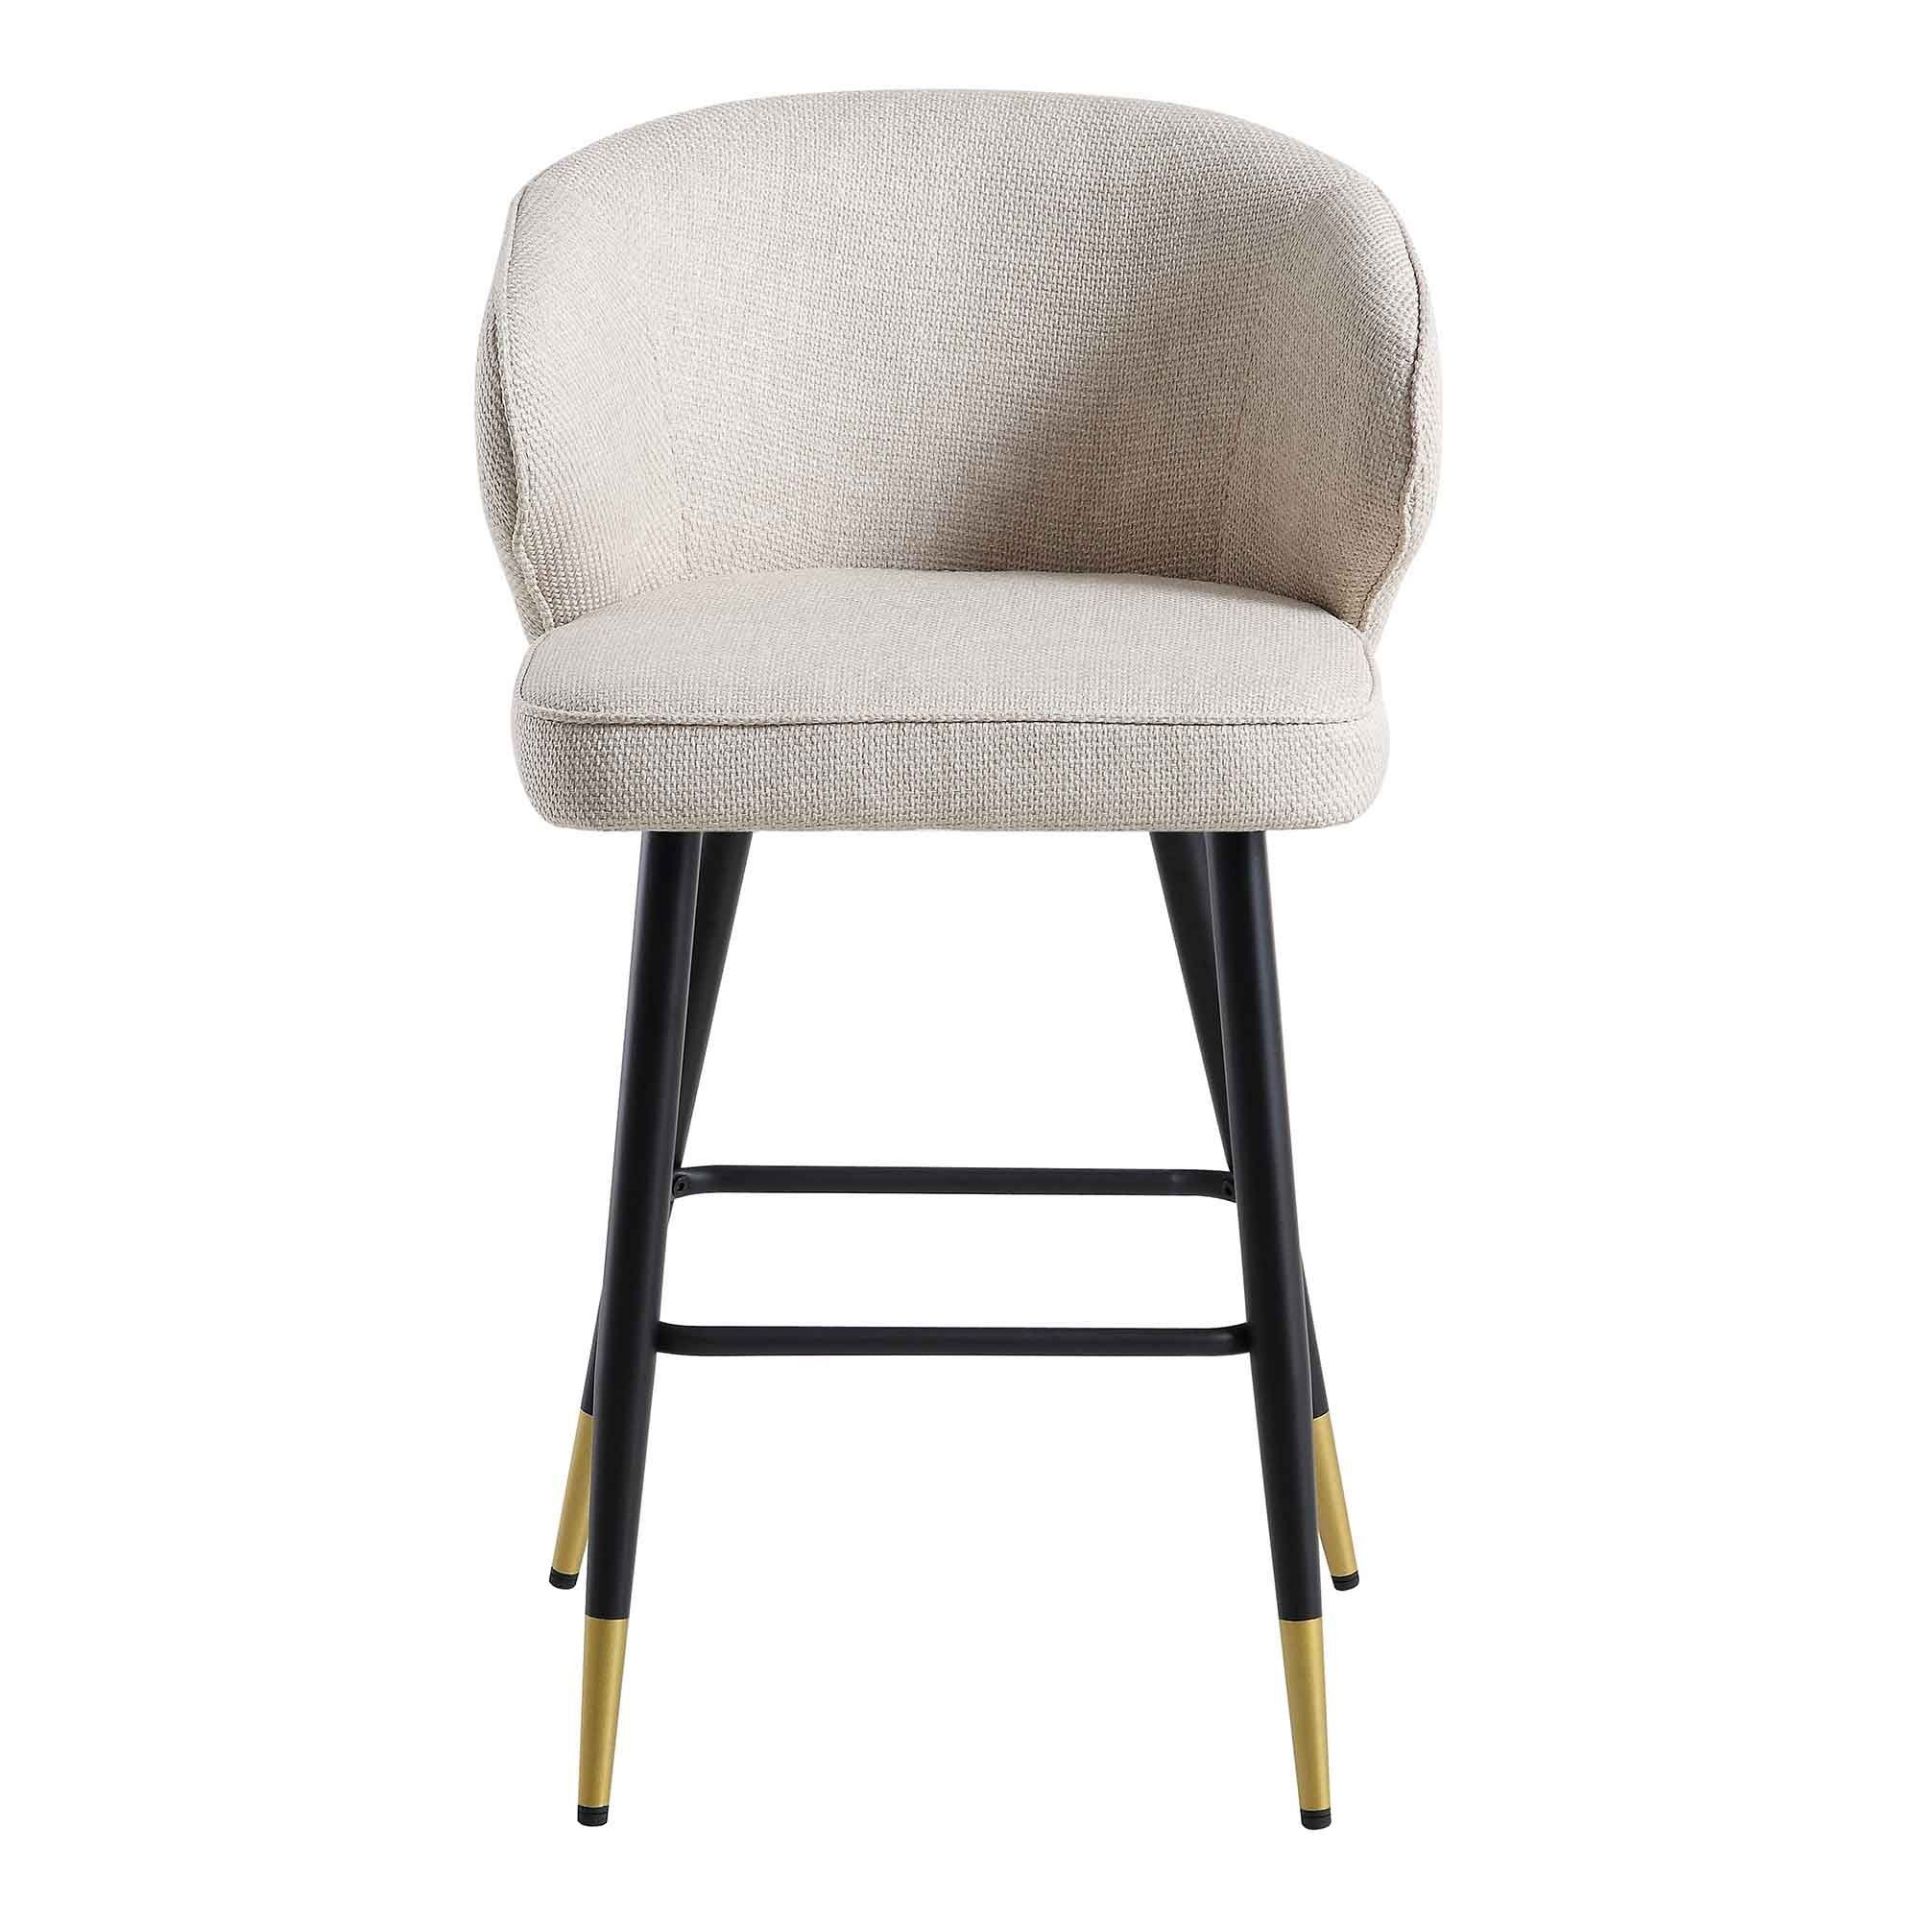 Langham Set of 2 Oatmeal Woven Fabric Upholstered Carver Counter Stools. - Er30. RRP £289.99. - Image 2 of 2